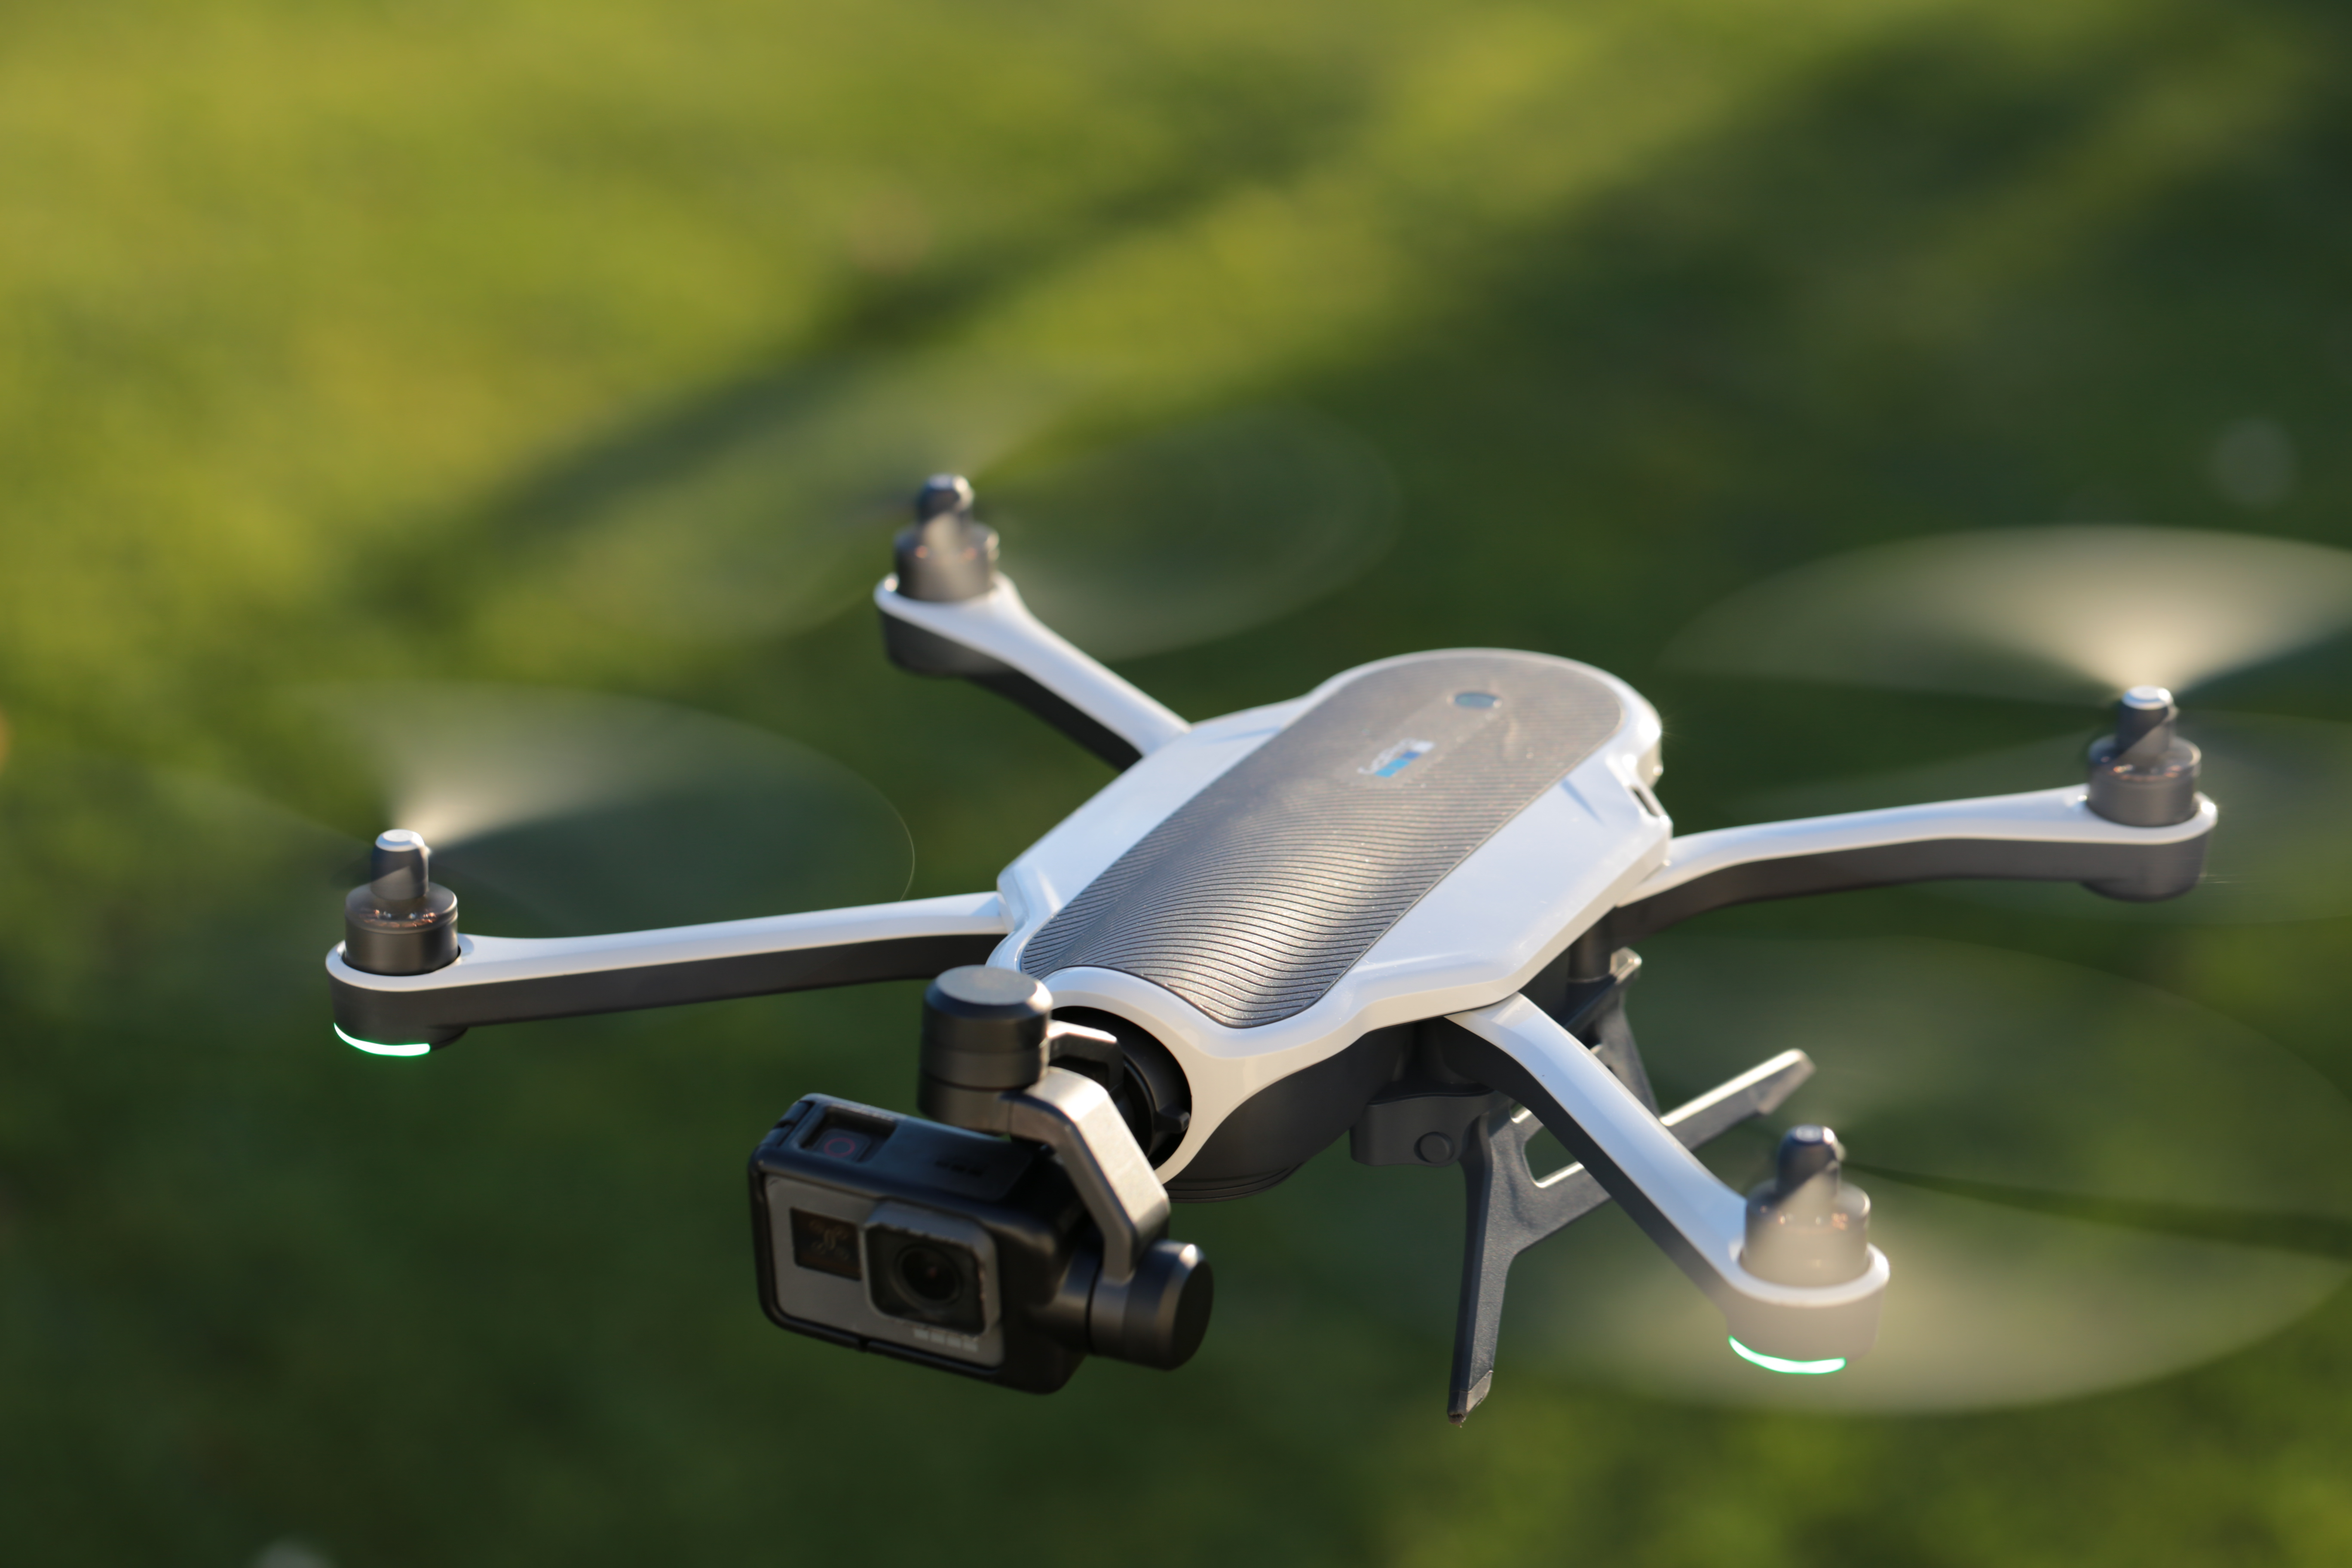 GoPro confirms layoffs, exit from drone business